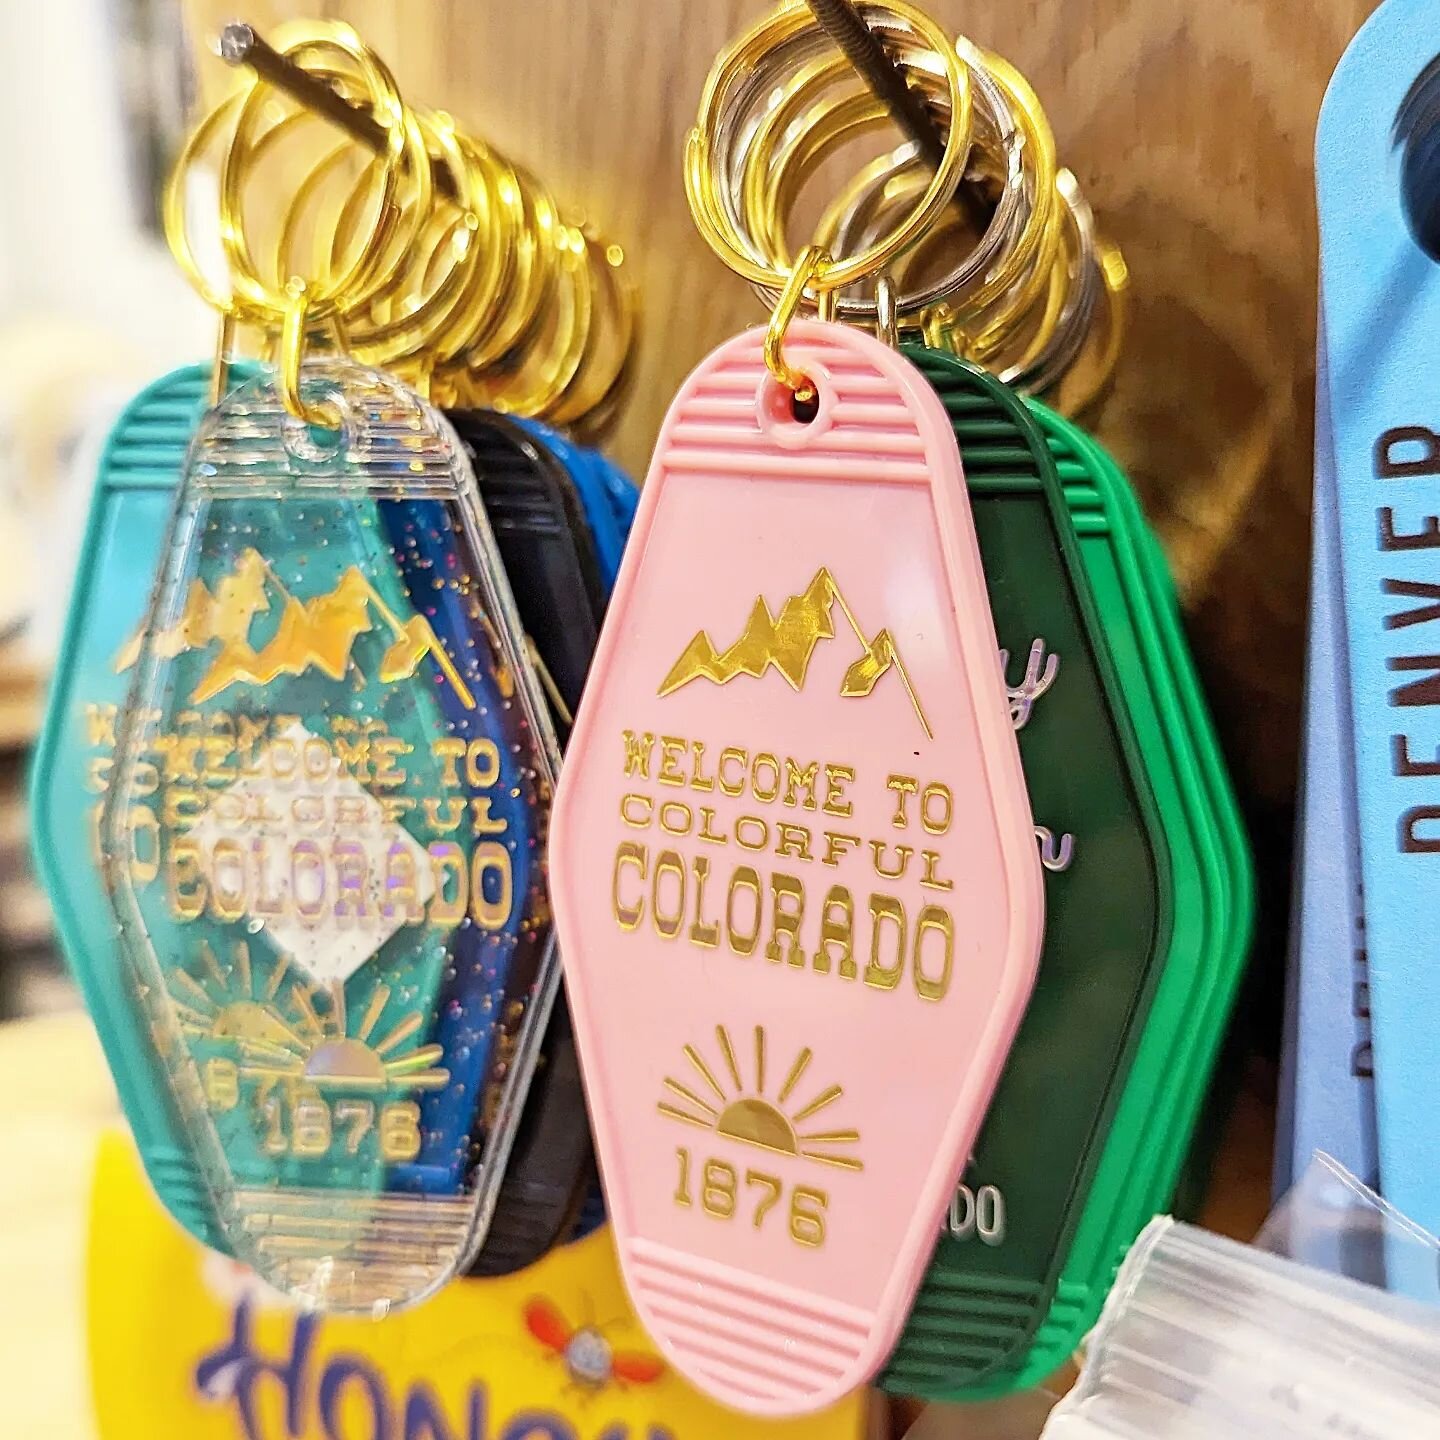 Motel style Colorado themed keychains. Locally designed by @me__eka our store manager!

#iheartdenverstore #keychains #colorado #motelkeychain #vintage #denverstore #localstuff #keepsakes #giftideas